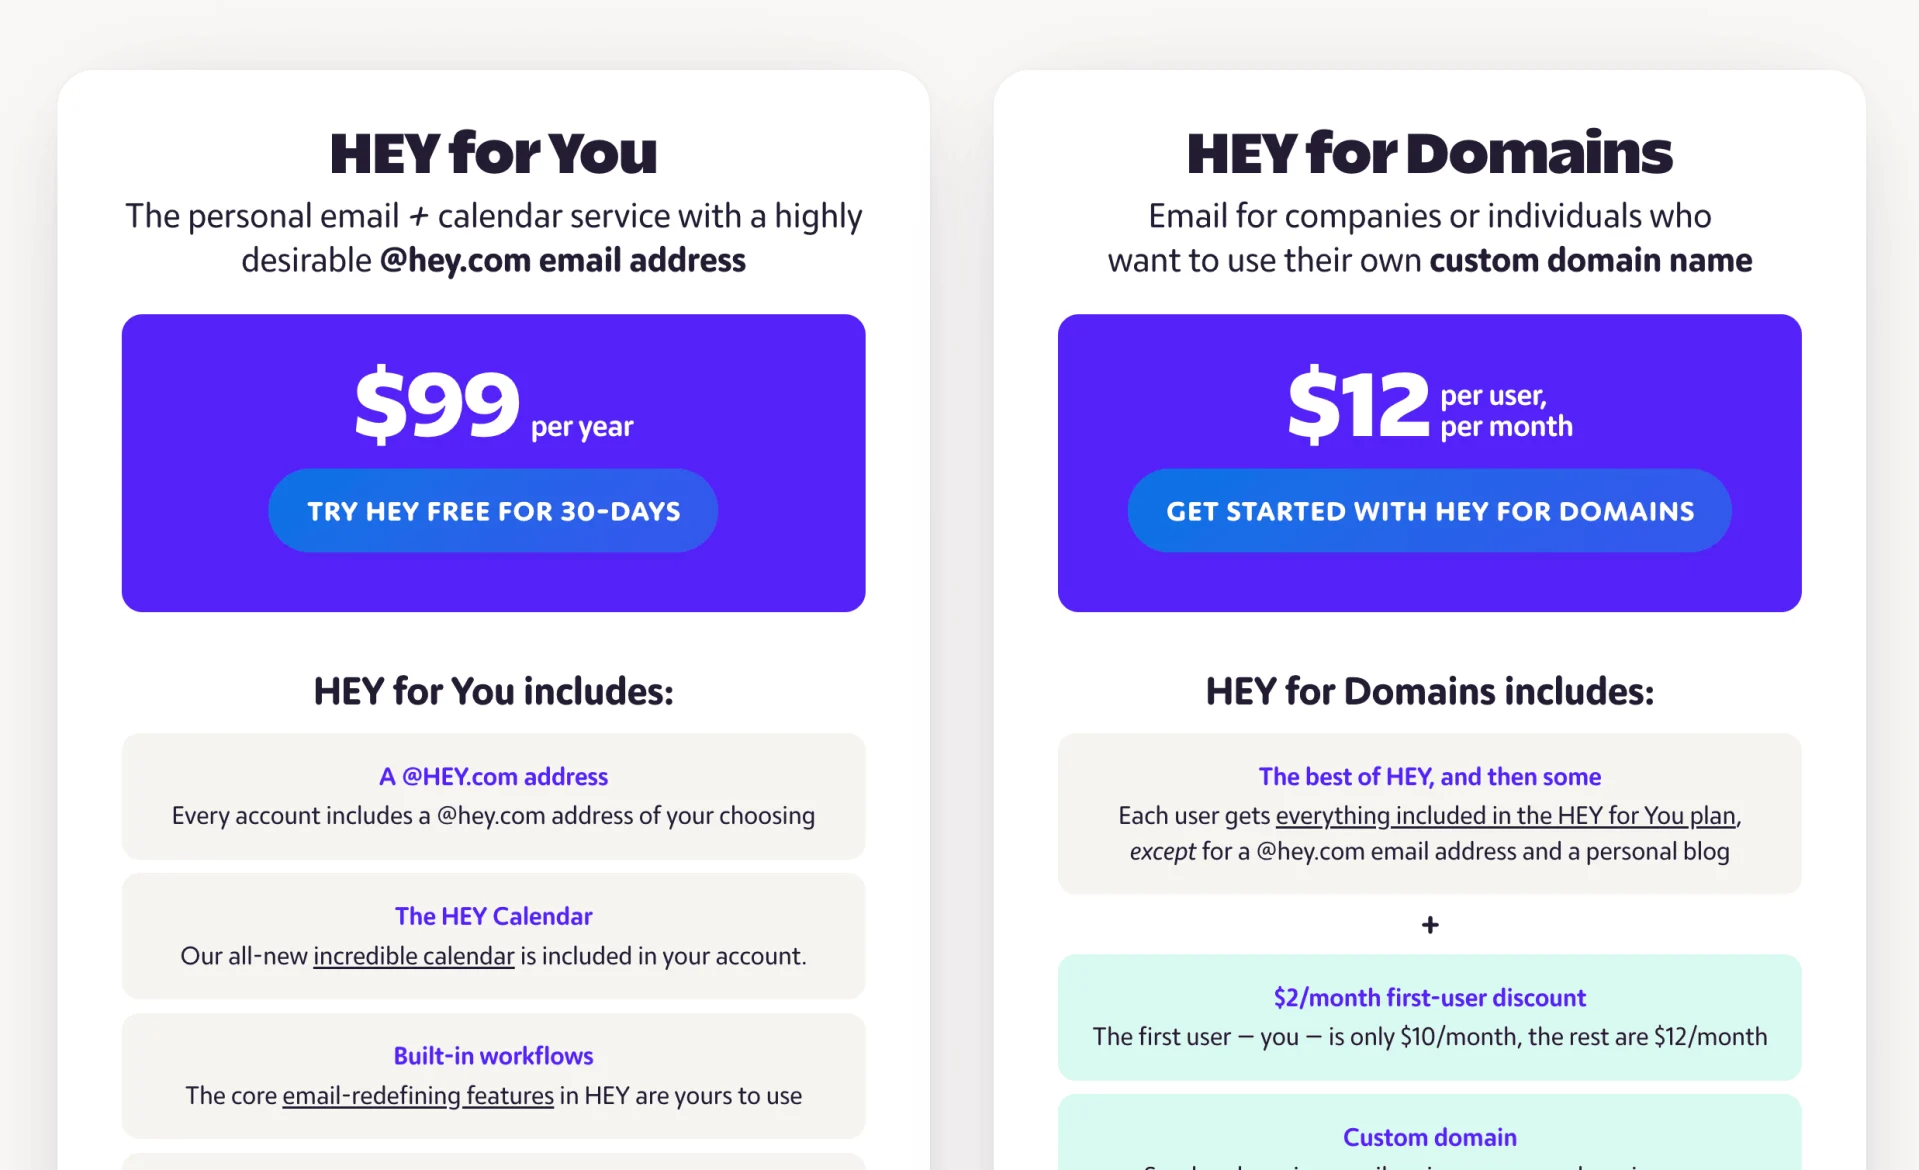 How much does Hey.com cost, how much per year